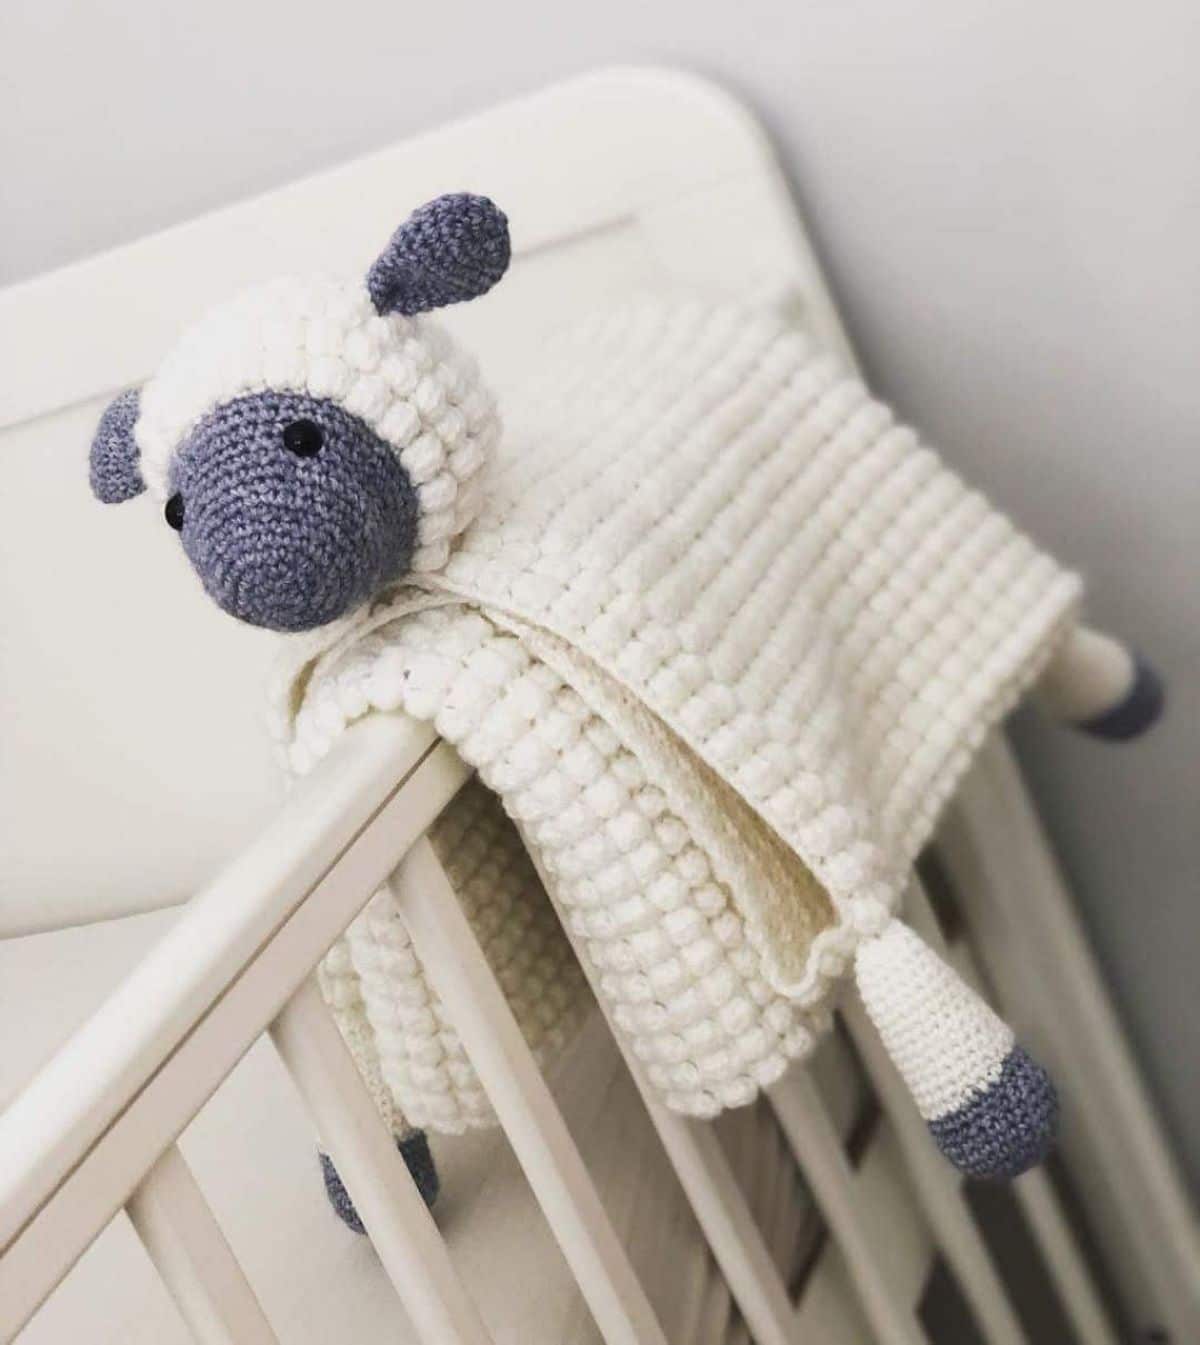 Cream crochet blanket with stuffed sheeps head and legs attached folded and draped over the railings of a cream crib. 